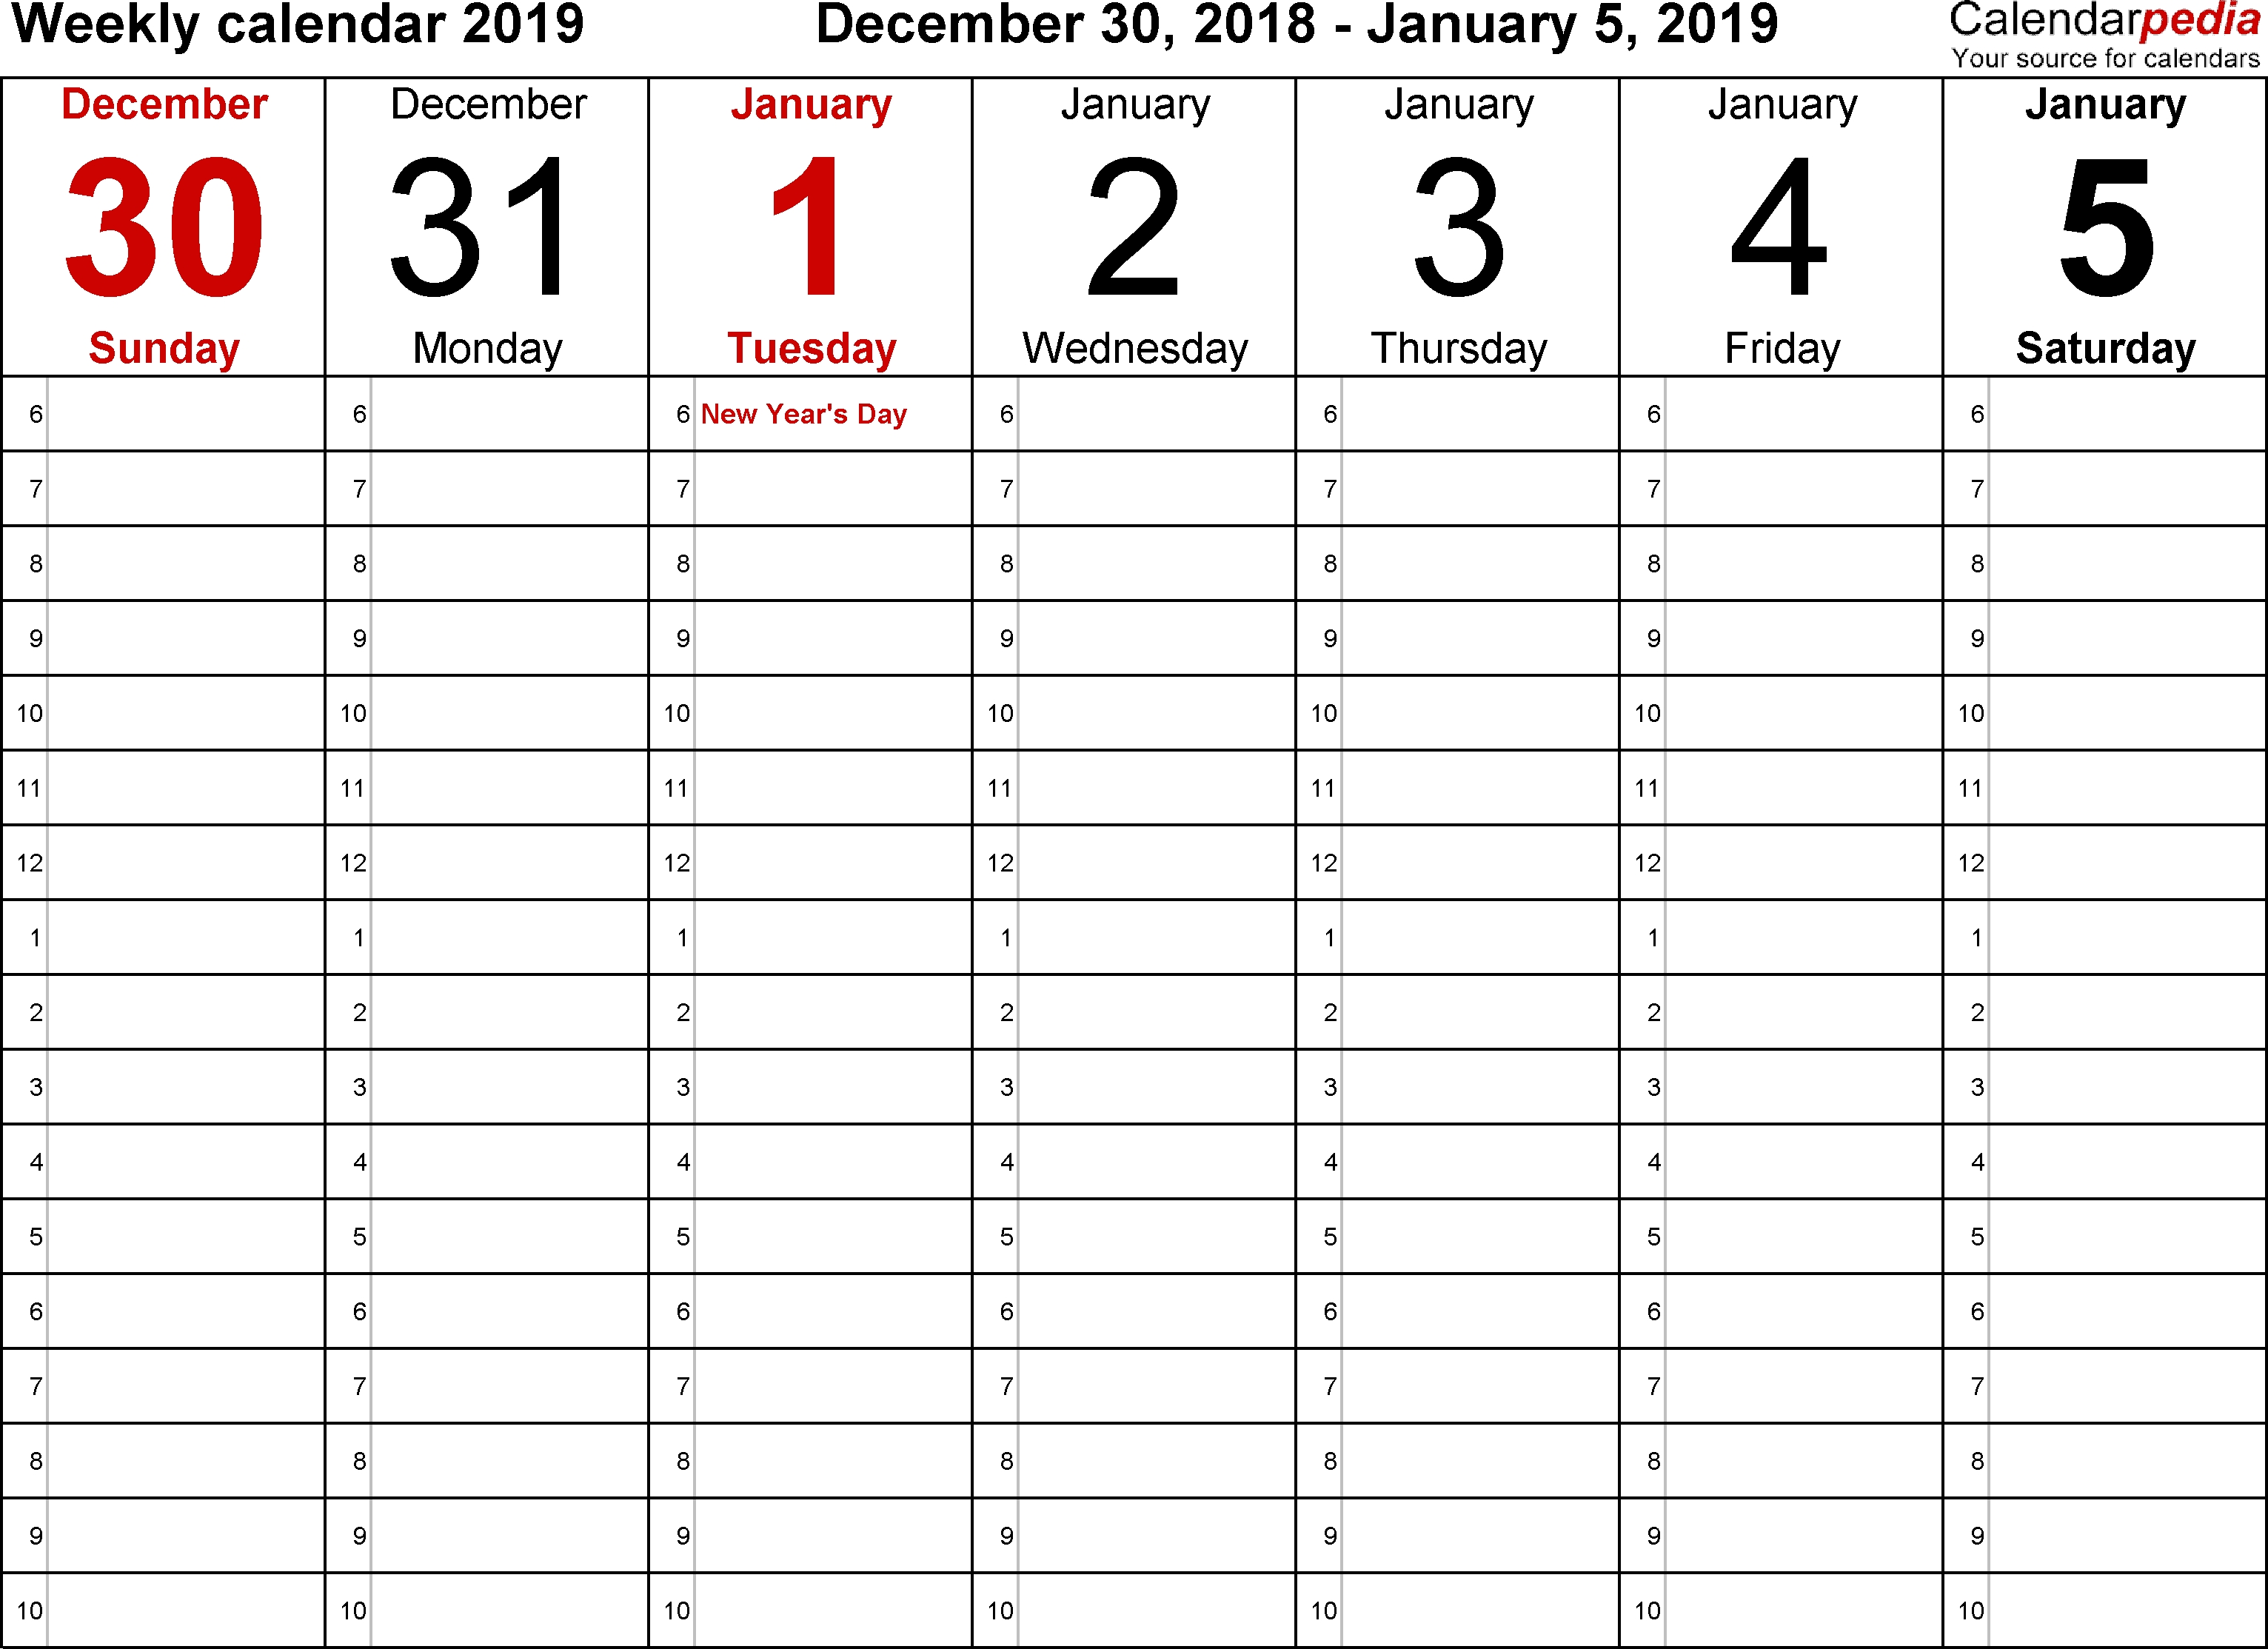 Weekly Calendar 2019 For Word - 12 Free Printable Templates within Hour By Hour Blank Calendars